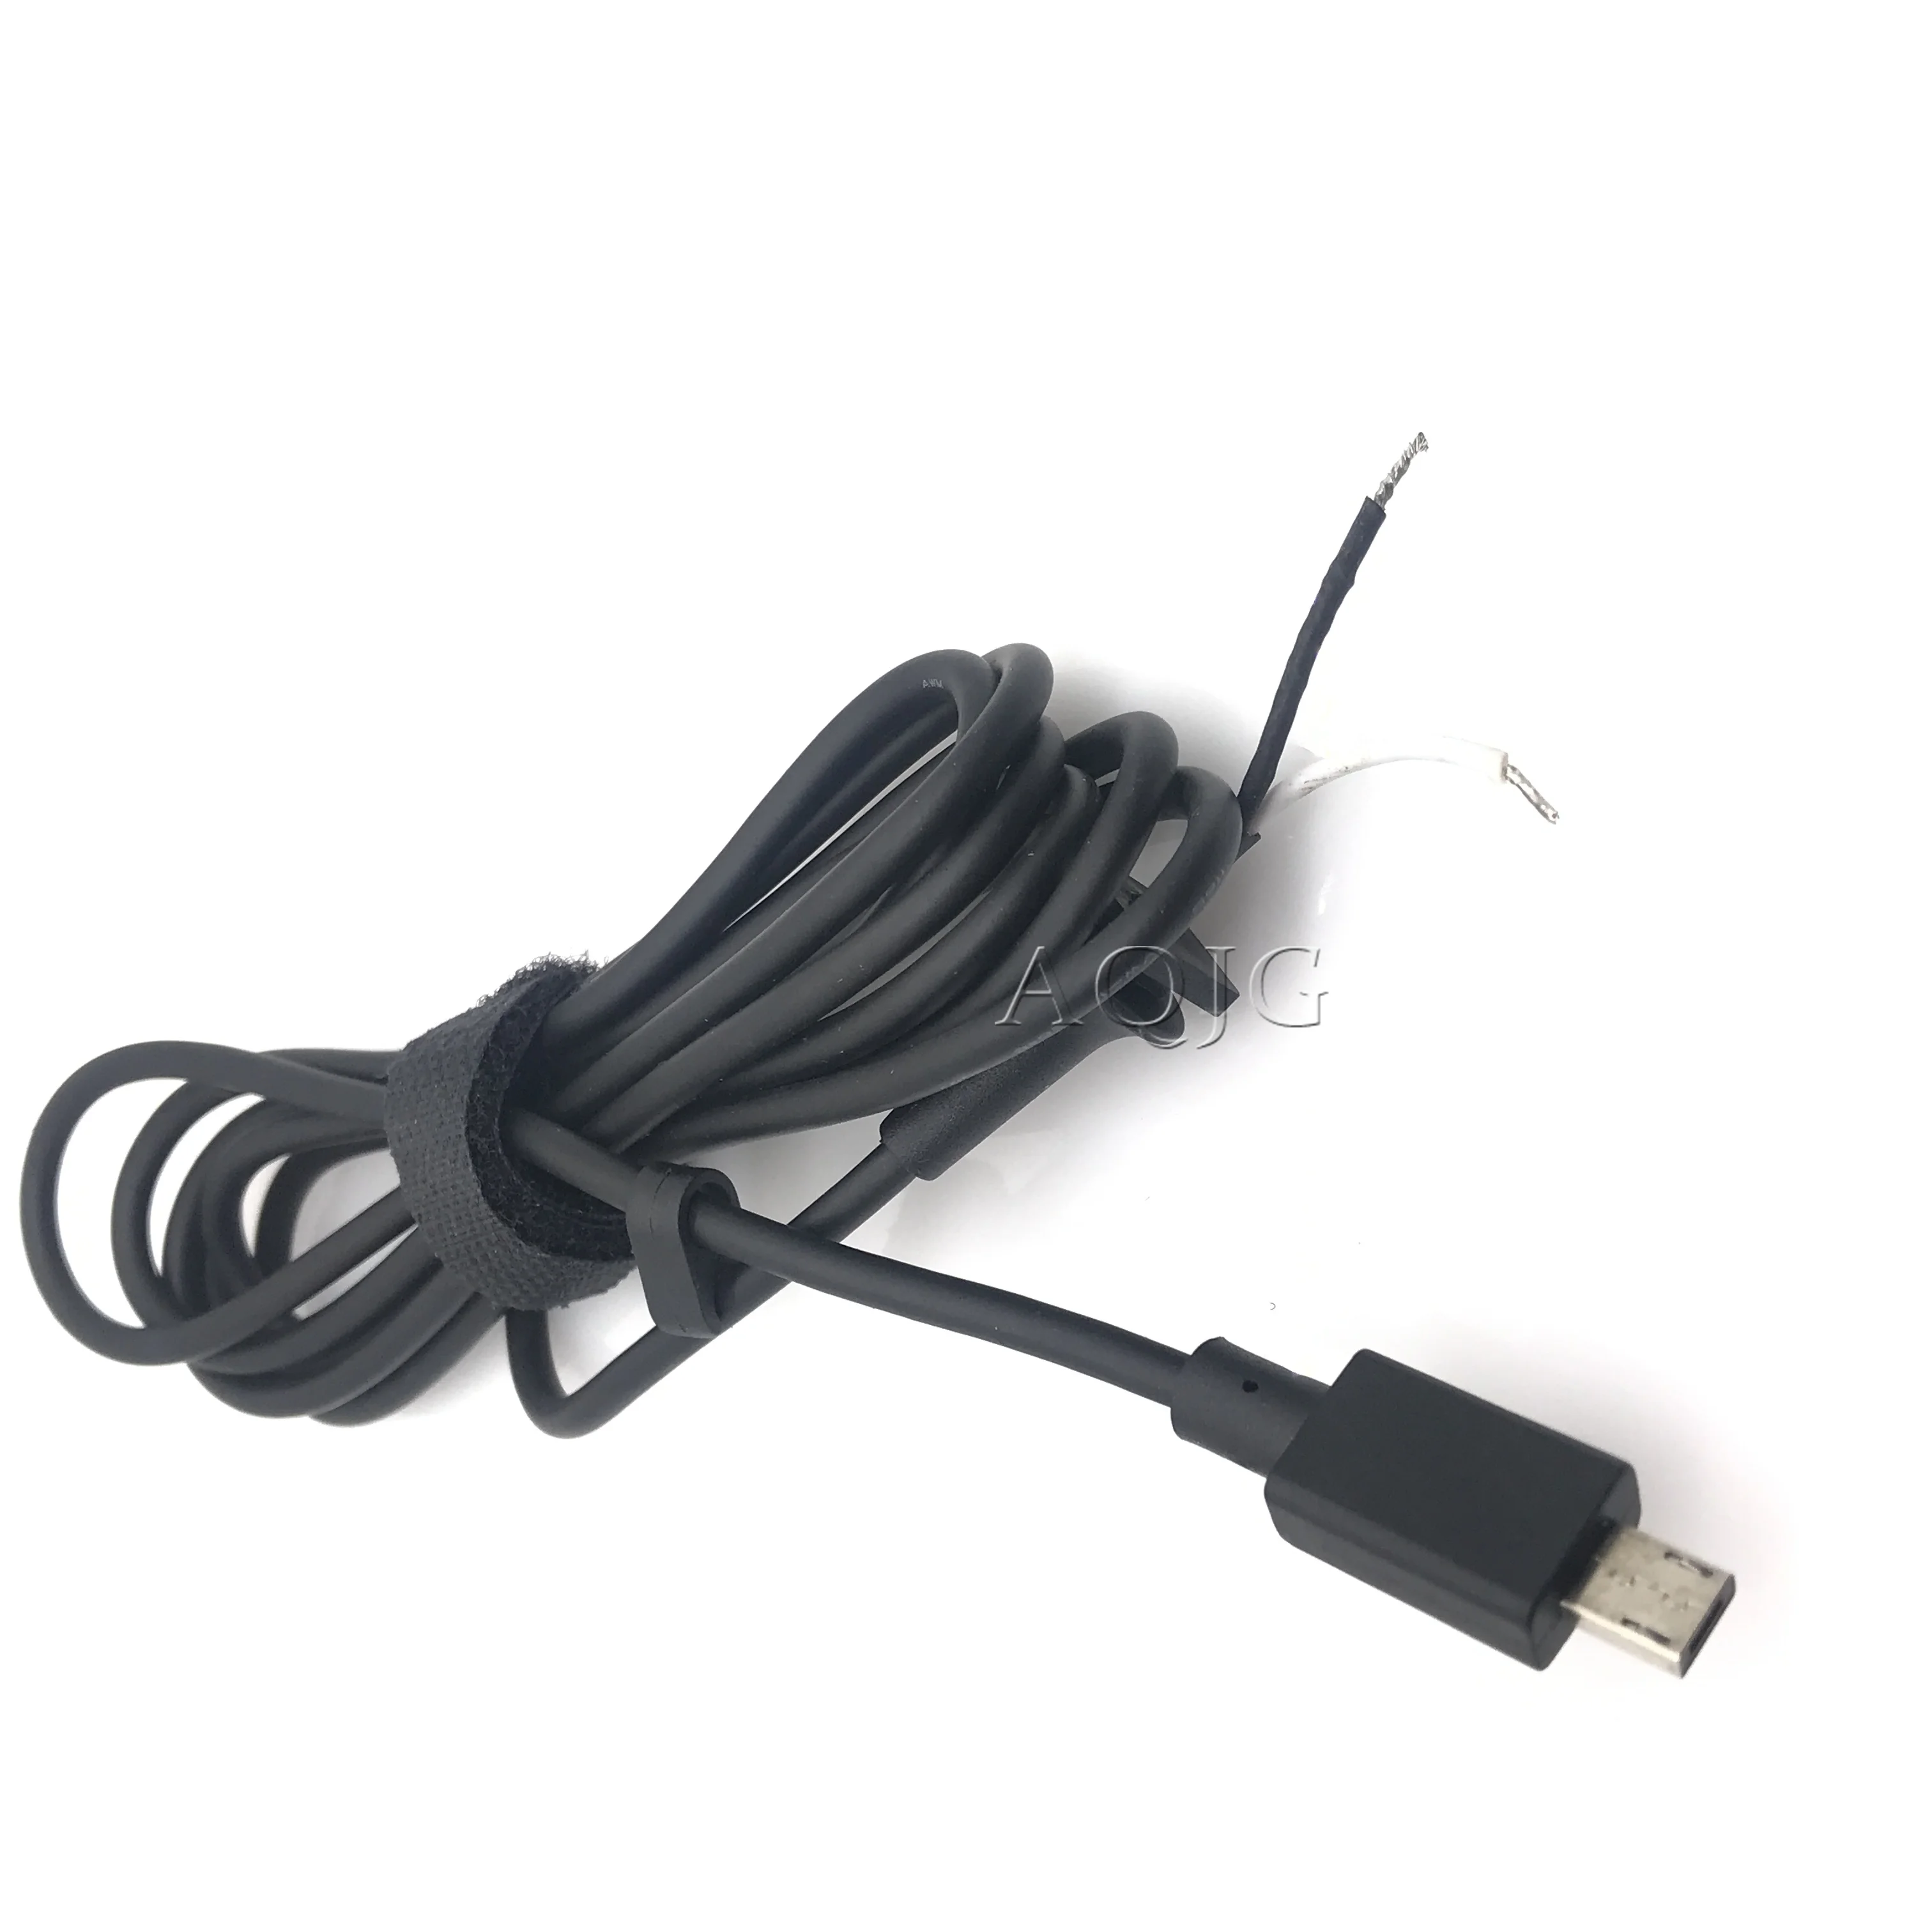 

DC Power Supply Adapter Jack Charger Charging Connector Cable Cord for Asus Eeebook X205T X205TA E202 E202SA Laptop